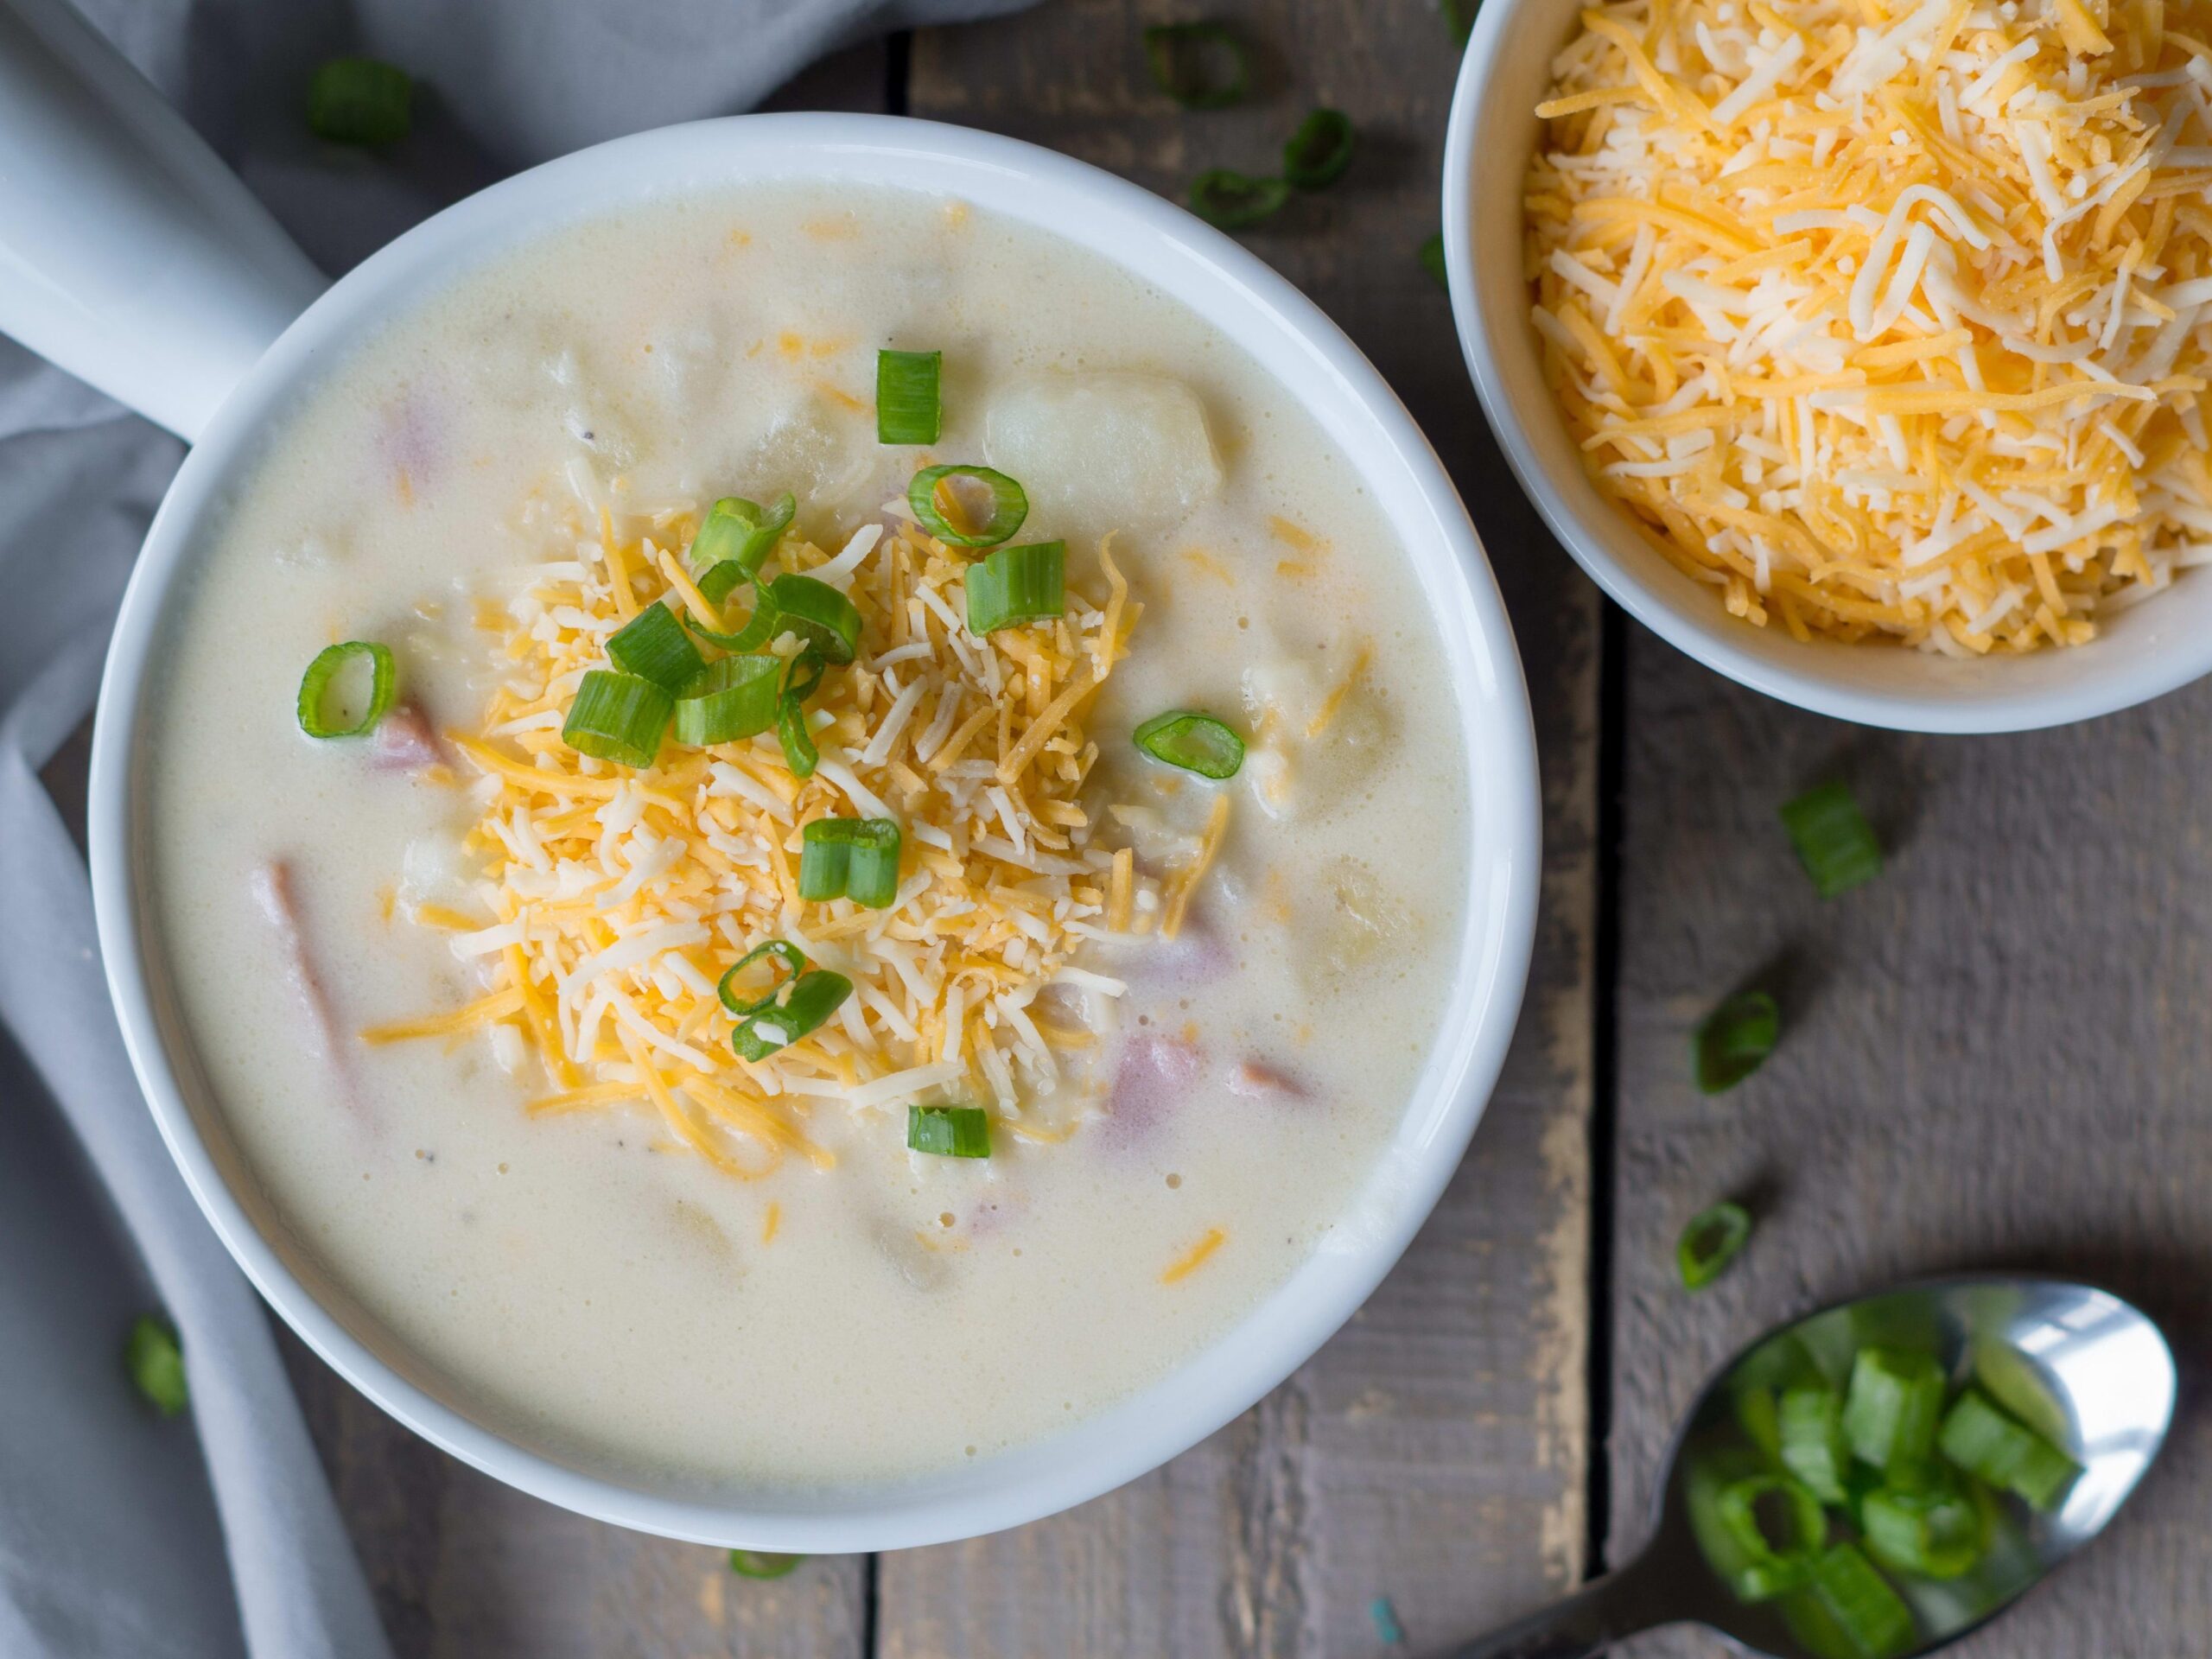  Creamy and comforting, this Baked Potato Soup is the perfect way to warm up on a chilly day.